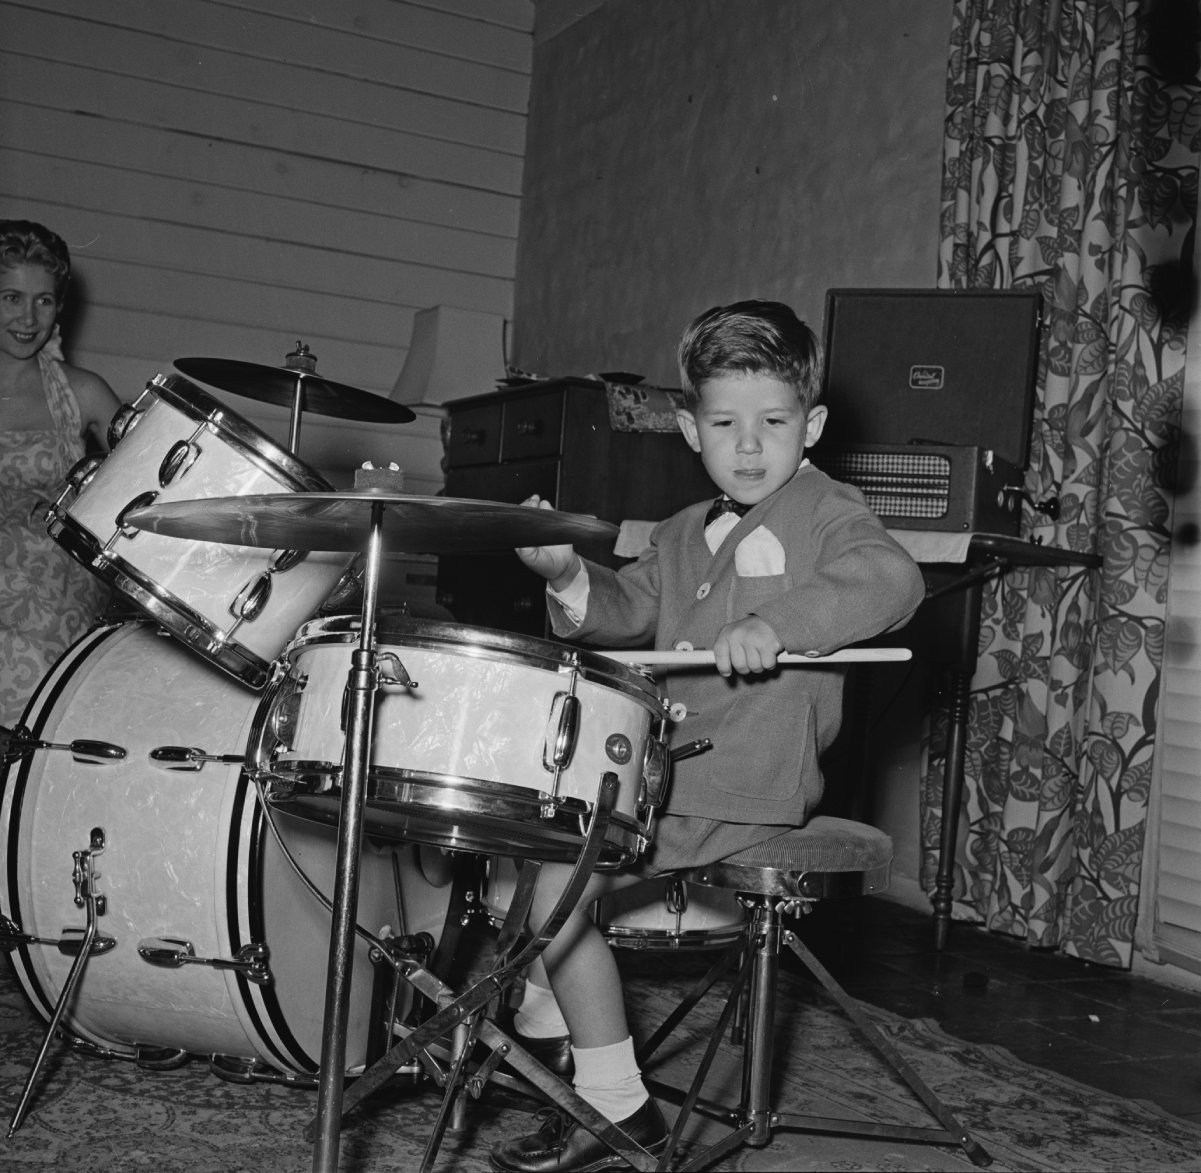 Keith Thibodeaux has been drumming from a very young age, pictured here in 1955